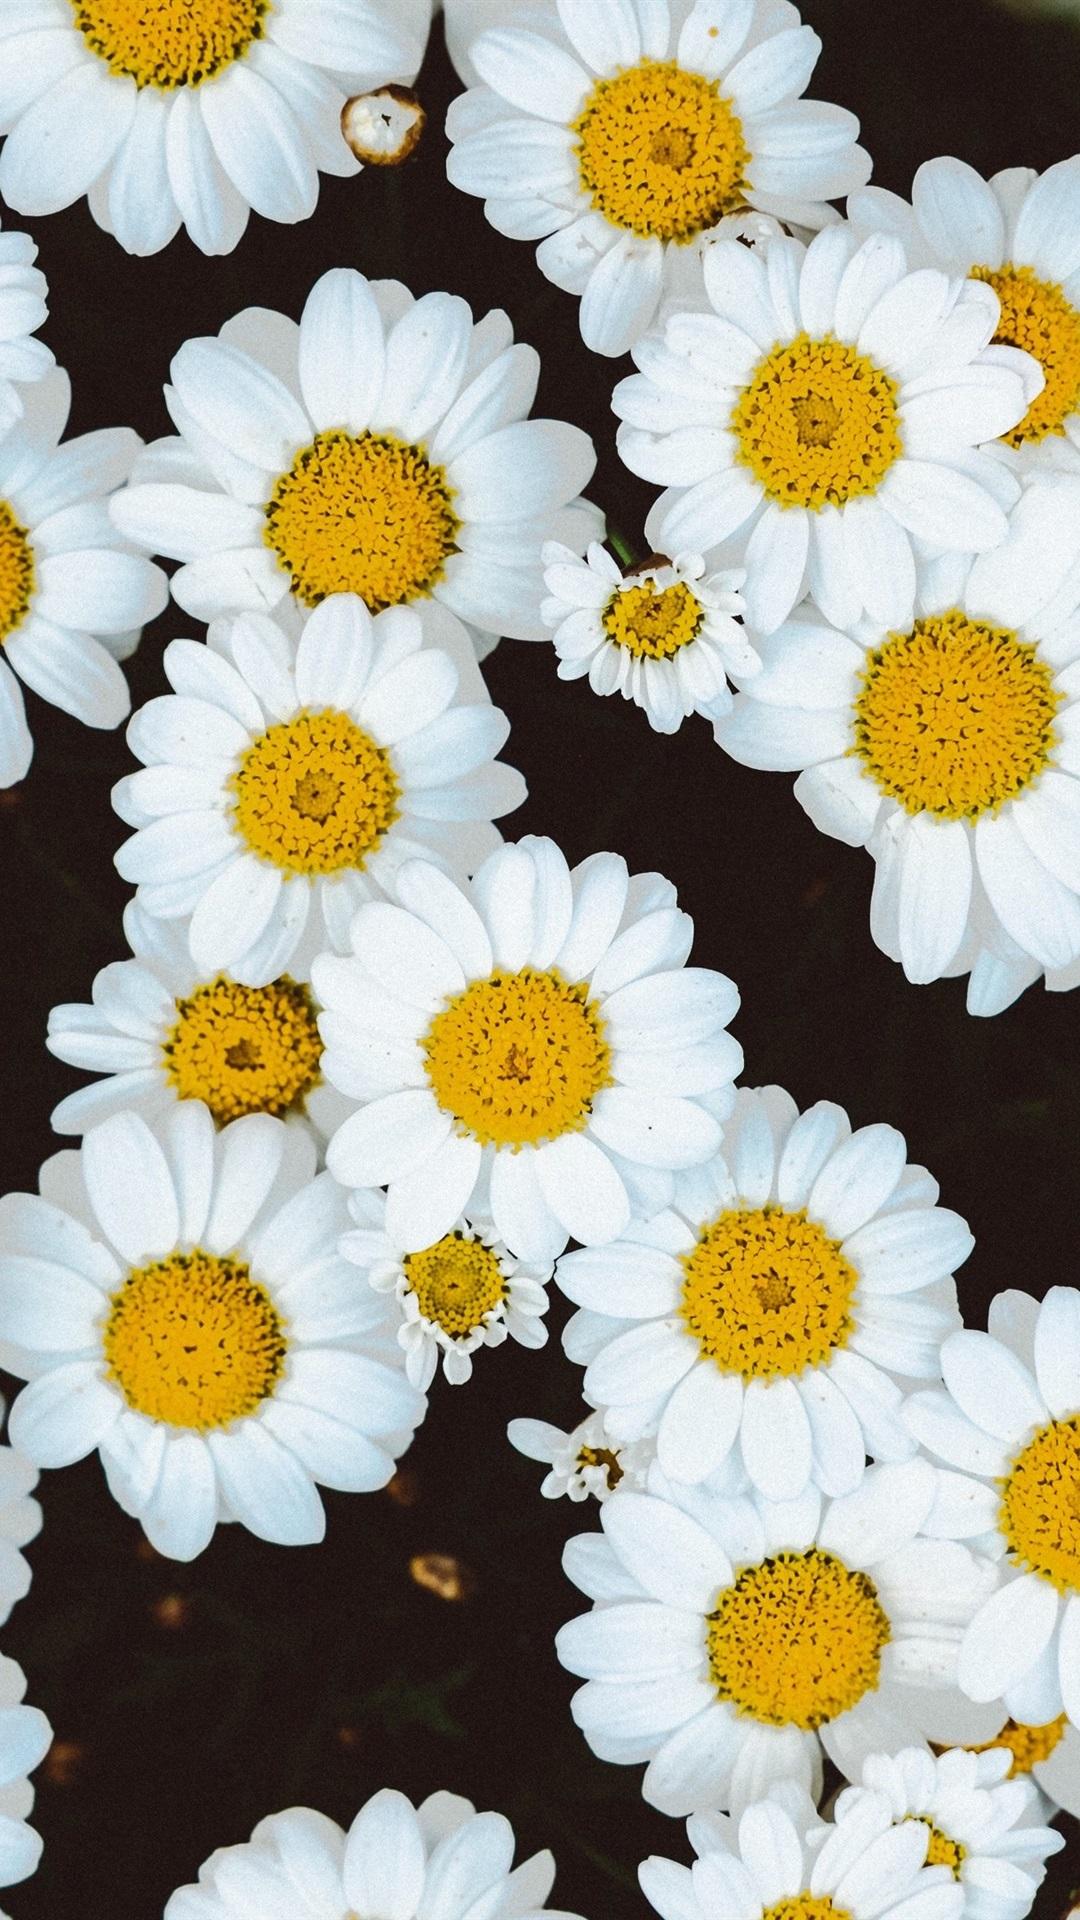 White Daisies Flowers Background 1080x1920 IPhone 8 7 6 6S Plus